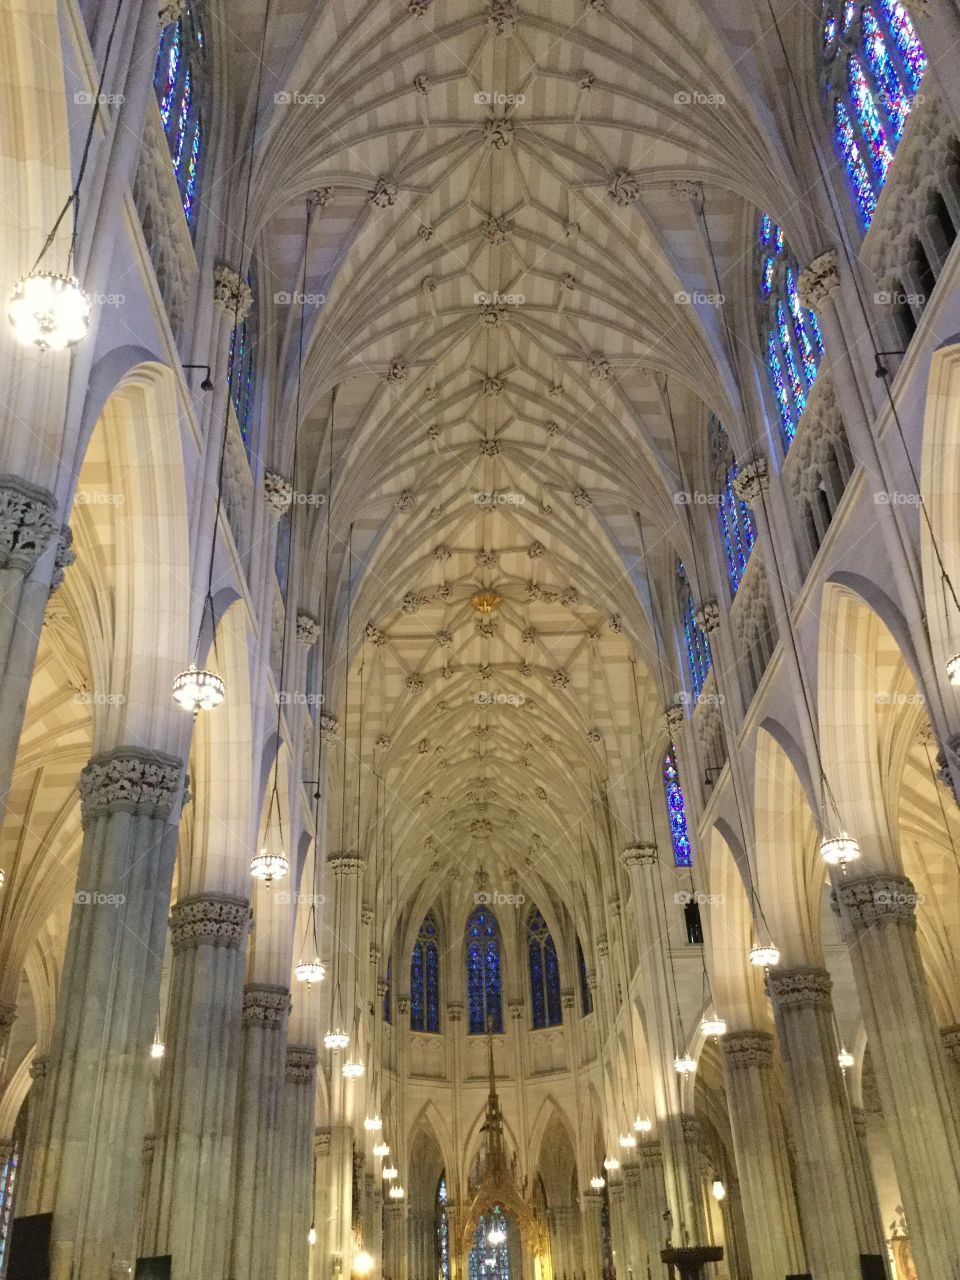 St Patrick’s Cathedral, New York